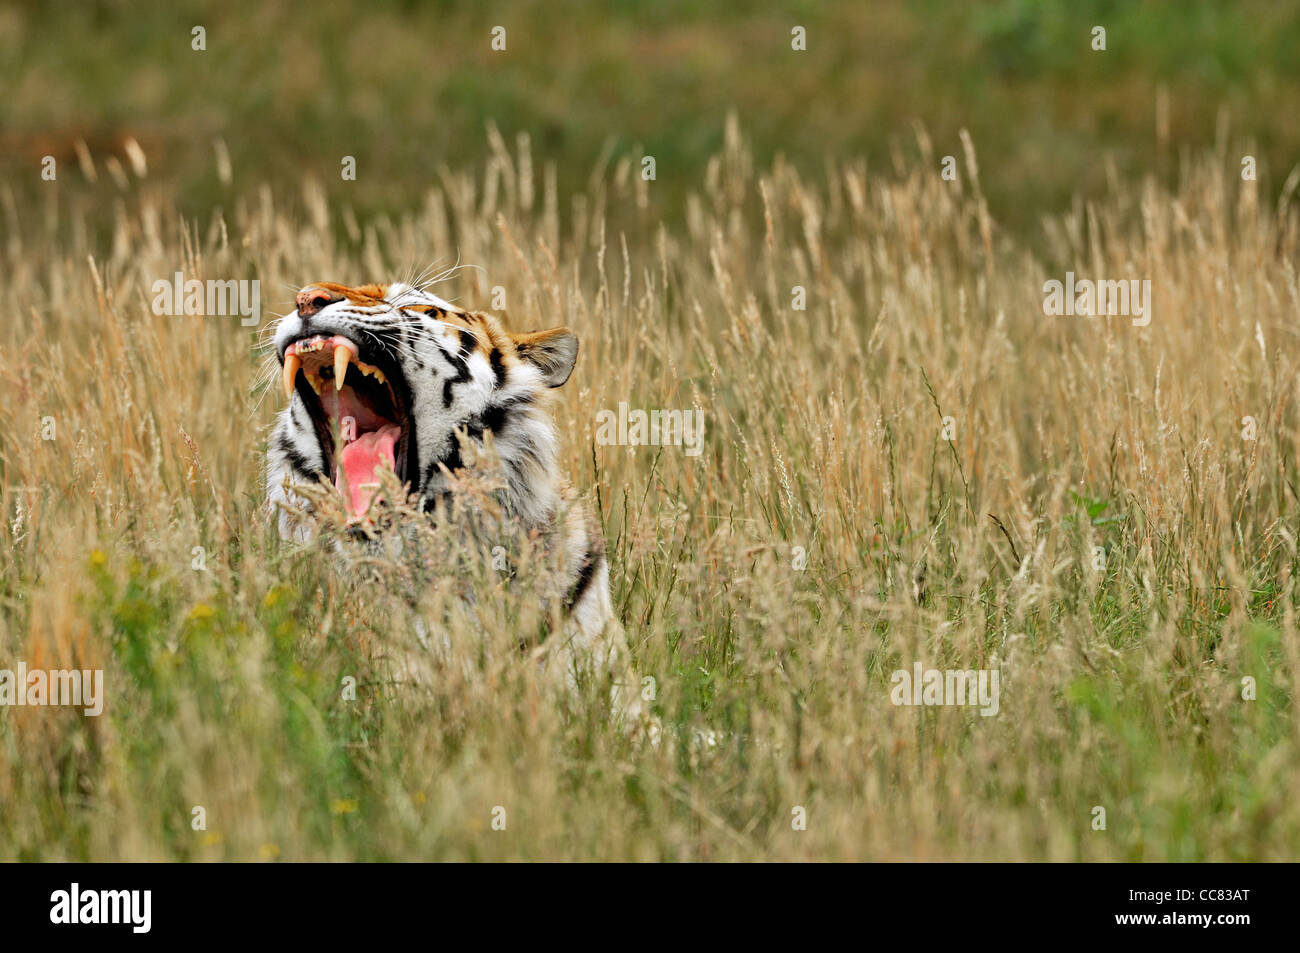 Siberian tiger / Amur tiger (Panthera tigris altaica) roaring in high grass, native to Russia and China Stock Photo